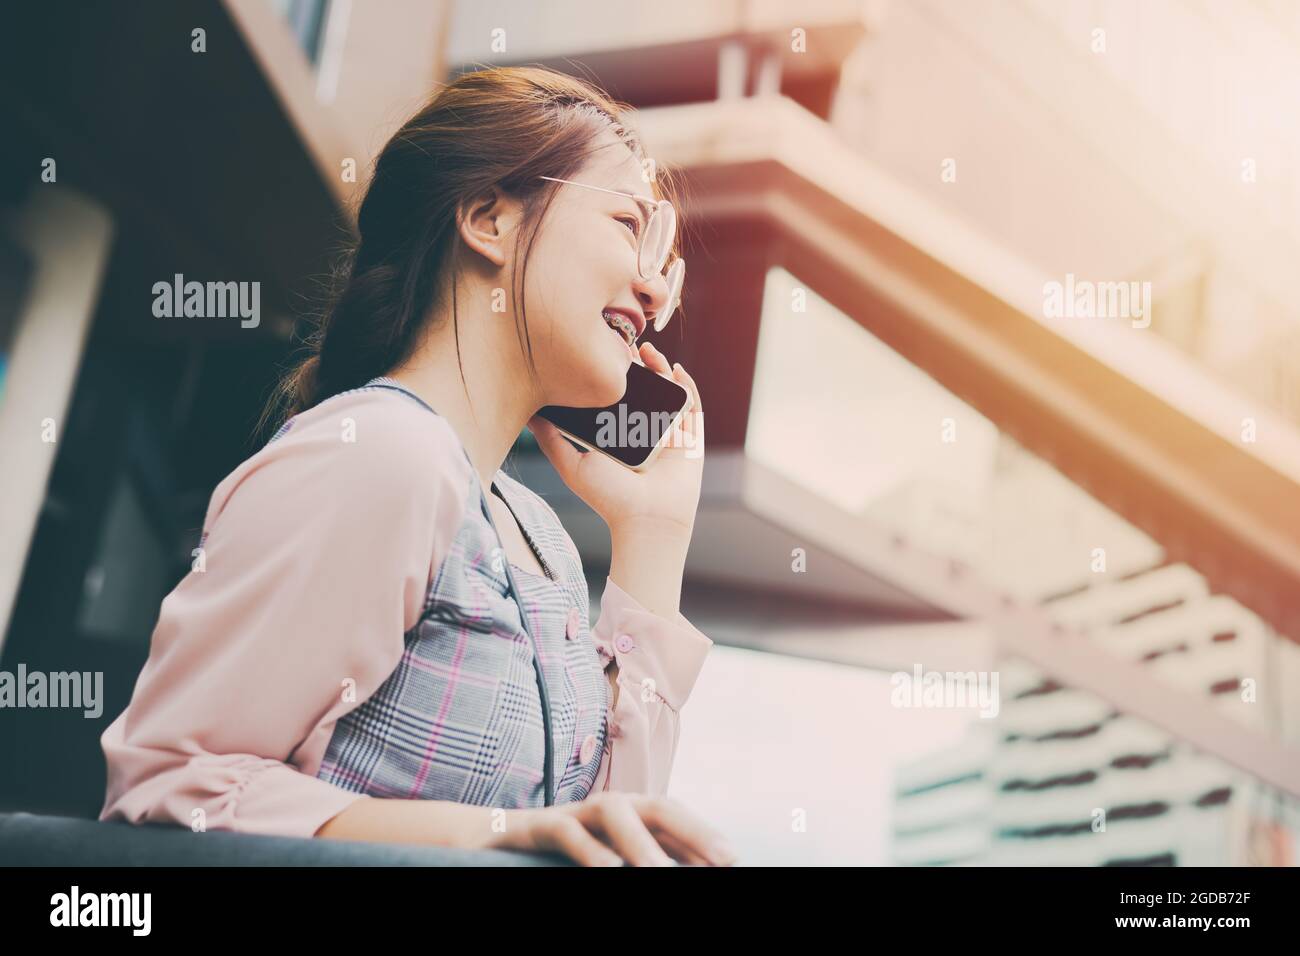 Teen girl using smartphone calling communication with happy smiling in modern city background vintage tone. Stock Photo